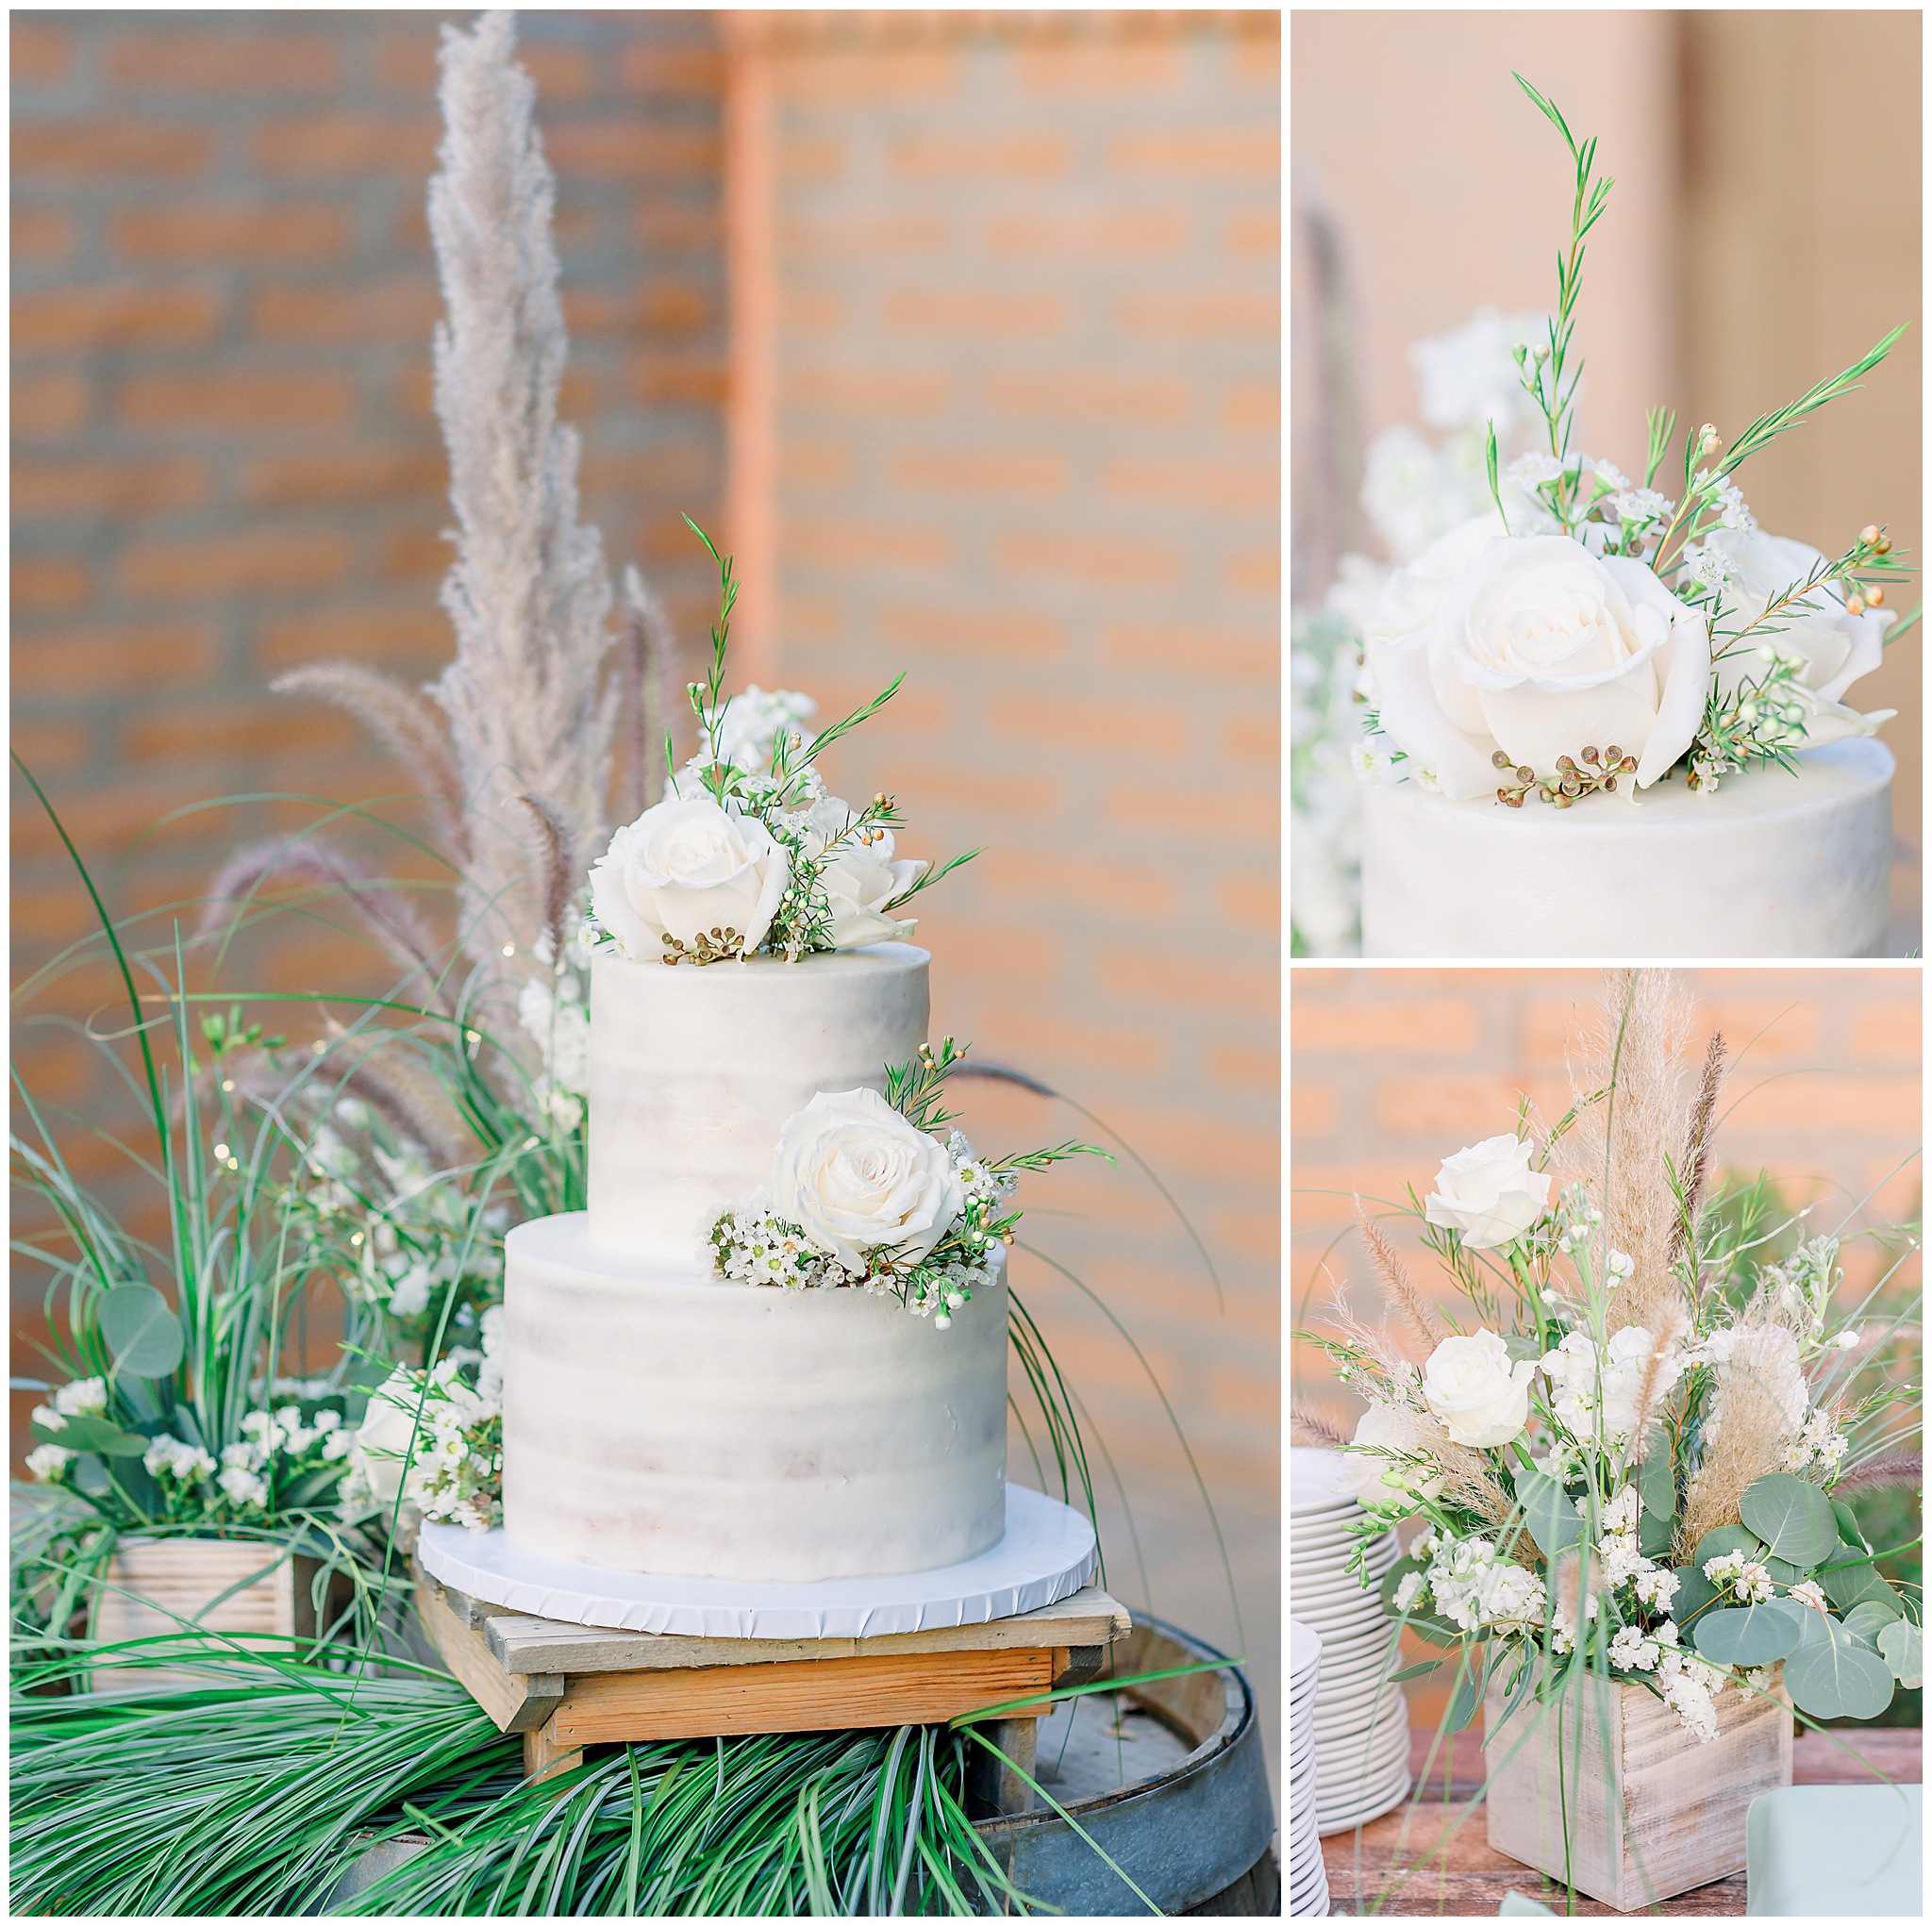 White Wedding Cake with Roses, Pompous grass, Greenery